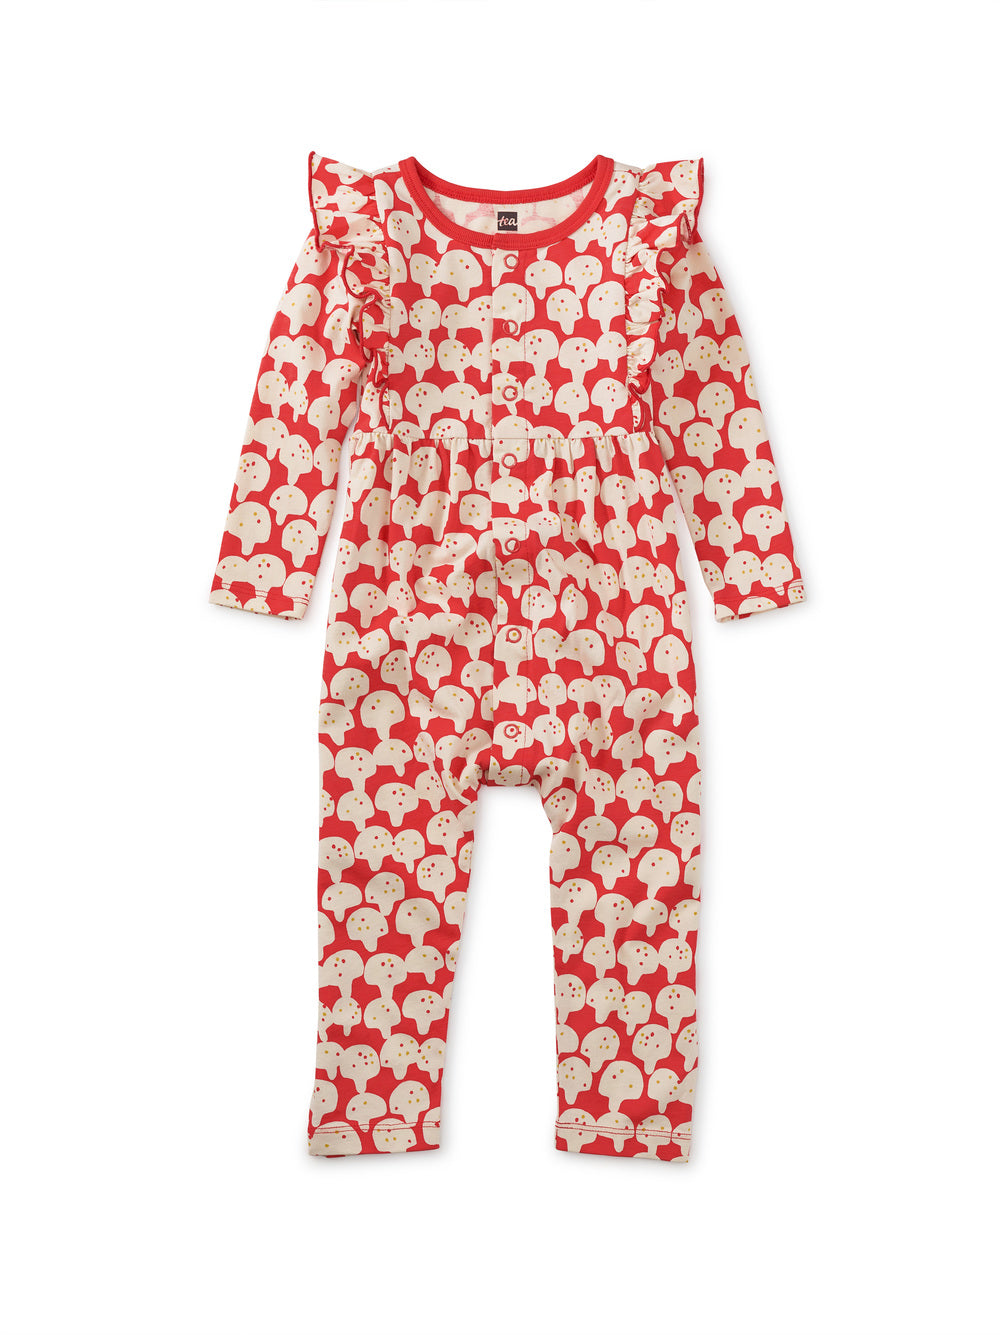 Snap Front Ruffle Baby Romper: Spotted Mushrooms